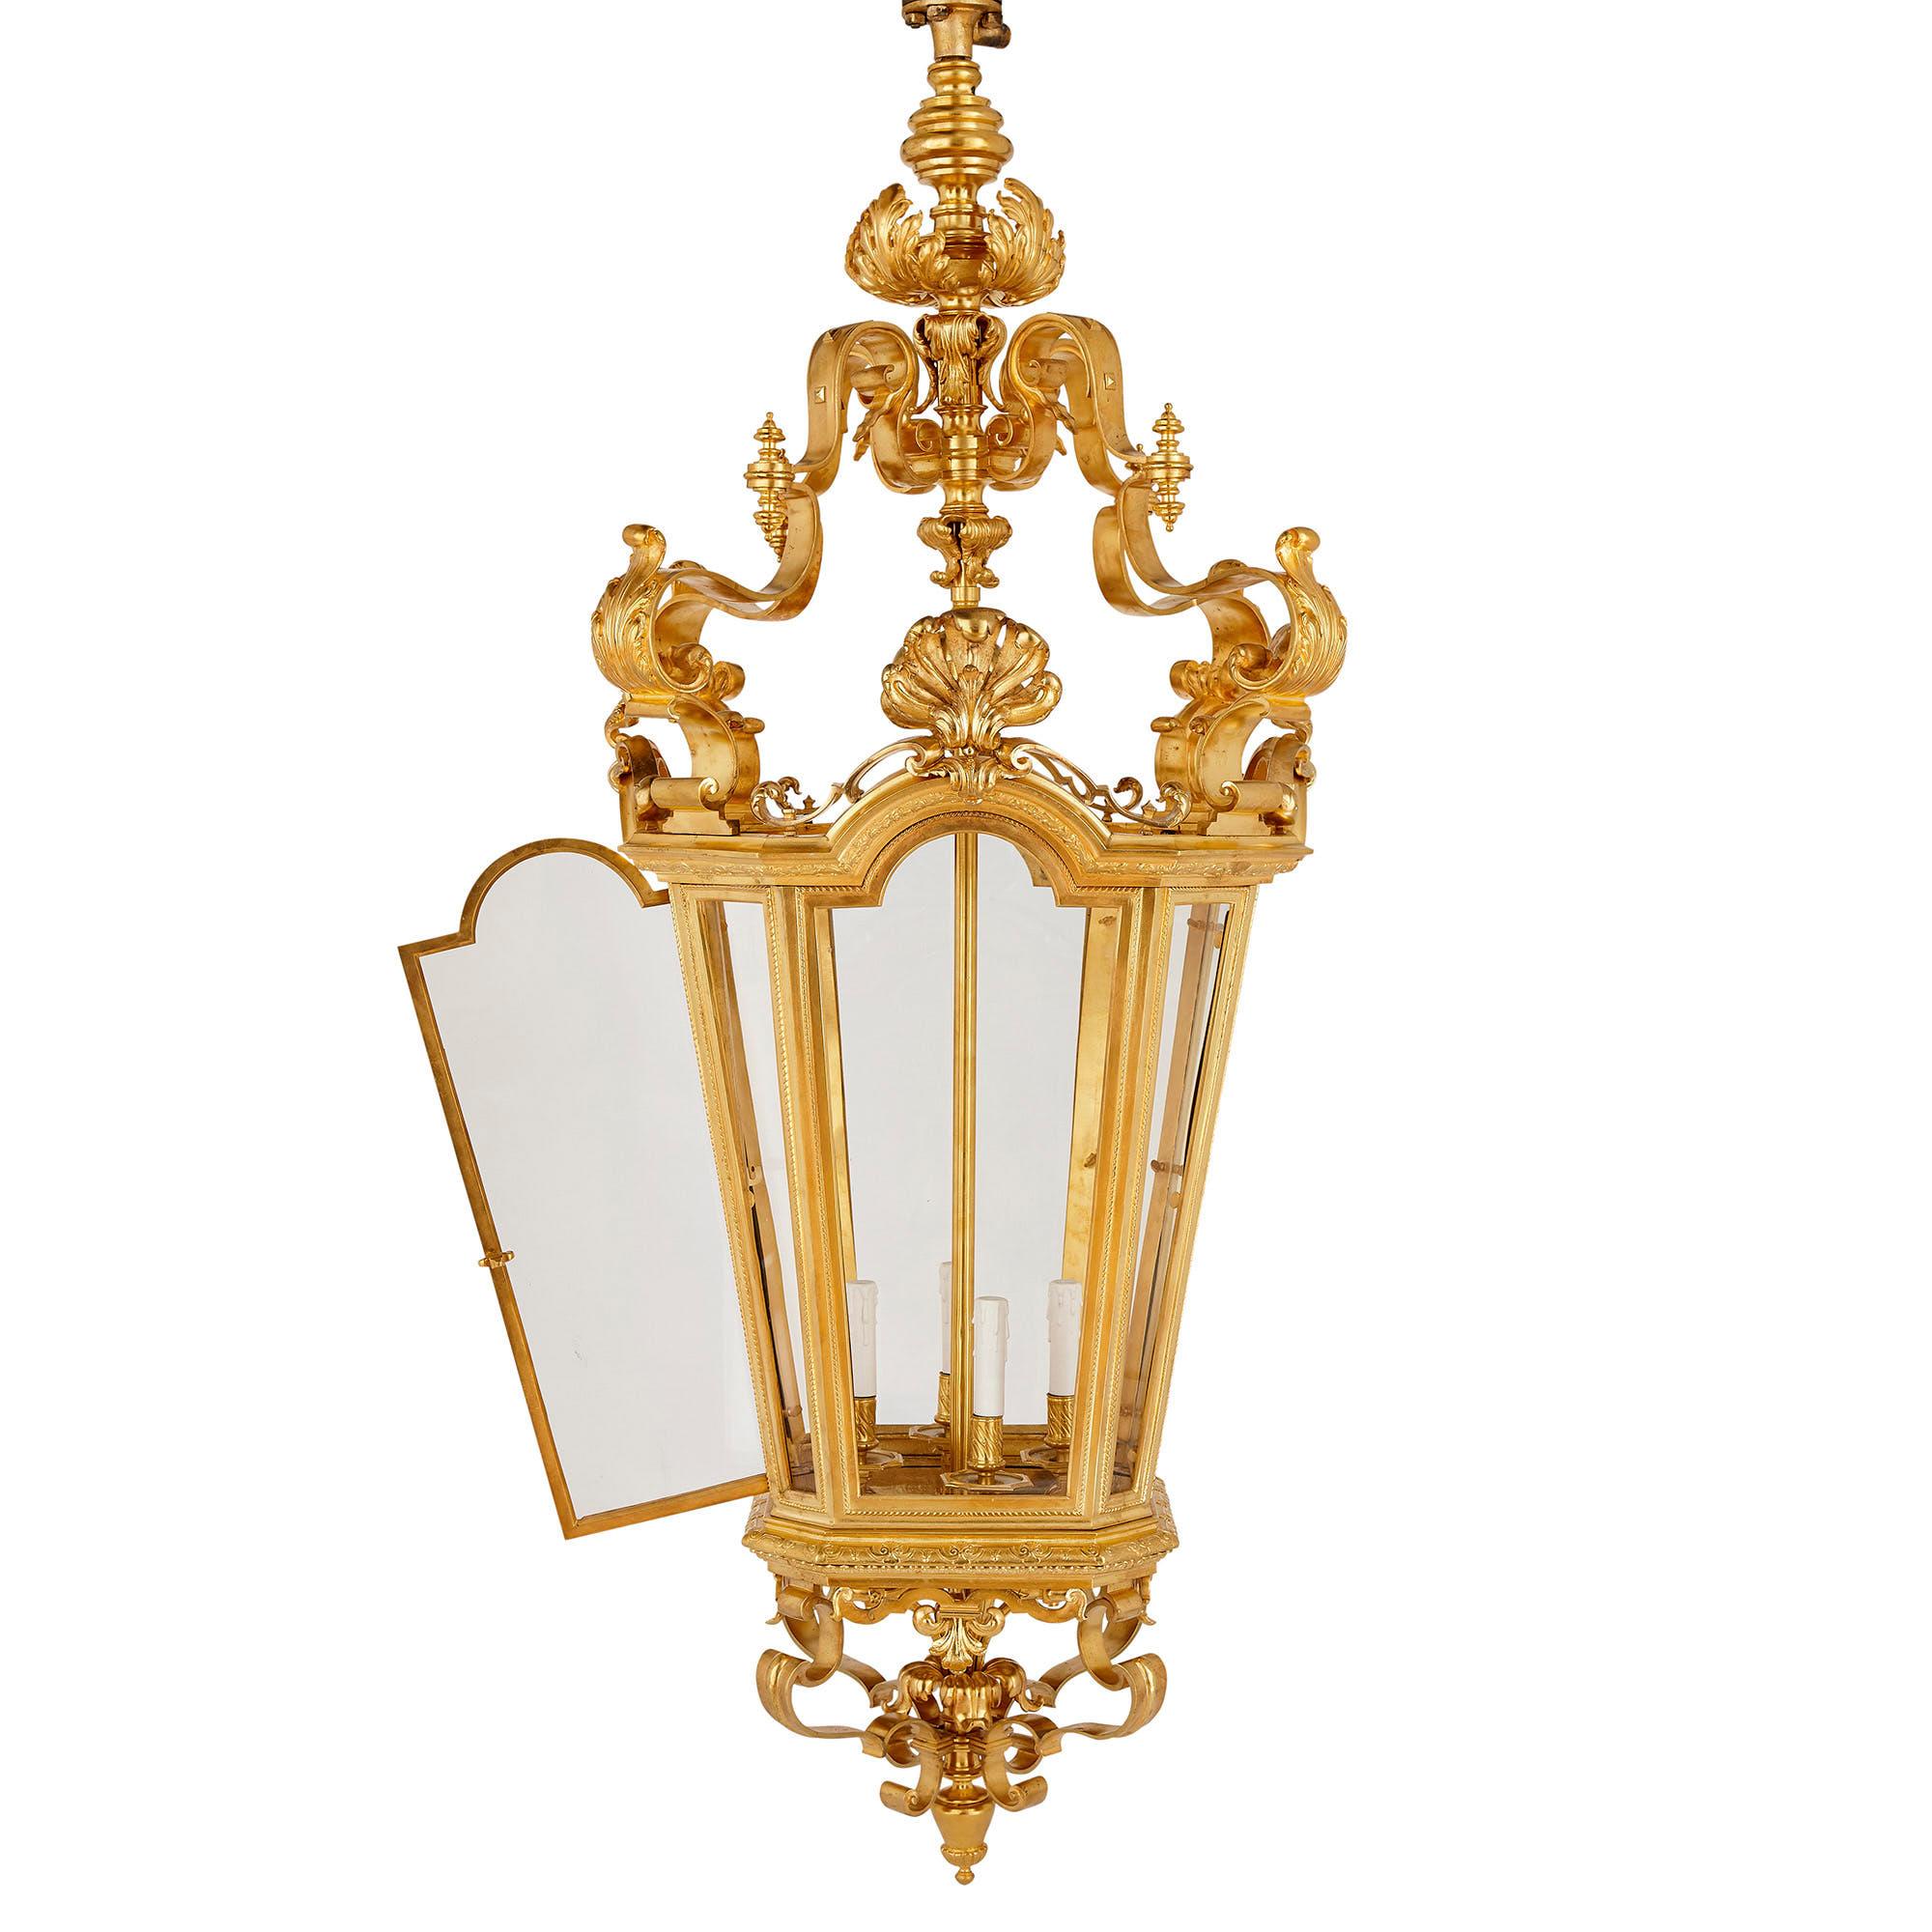 Very large Napoleon III period Rococo style gilt bronze lantern
French, late 19th century
Measures: Height 176cm, width 80cm, depth 80cm

This exceptional lantern was produced during the reign of Napoleon III, a time known as the Second Empire.